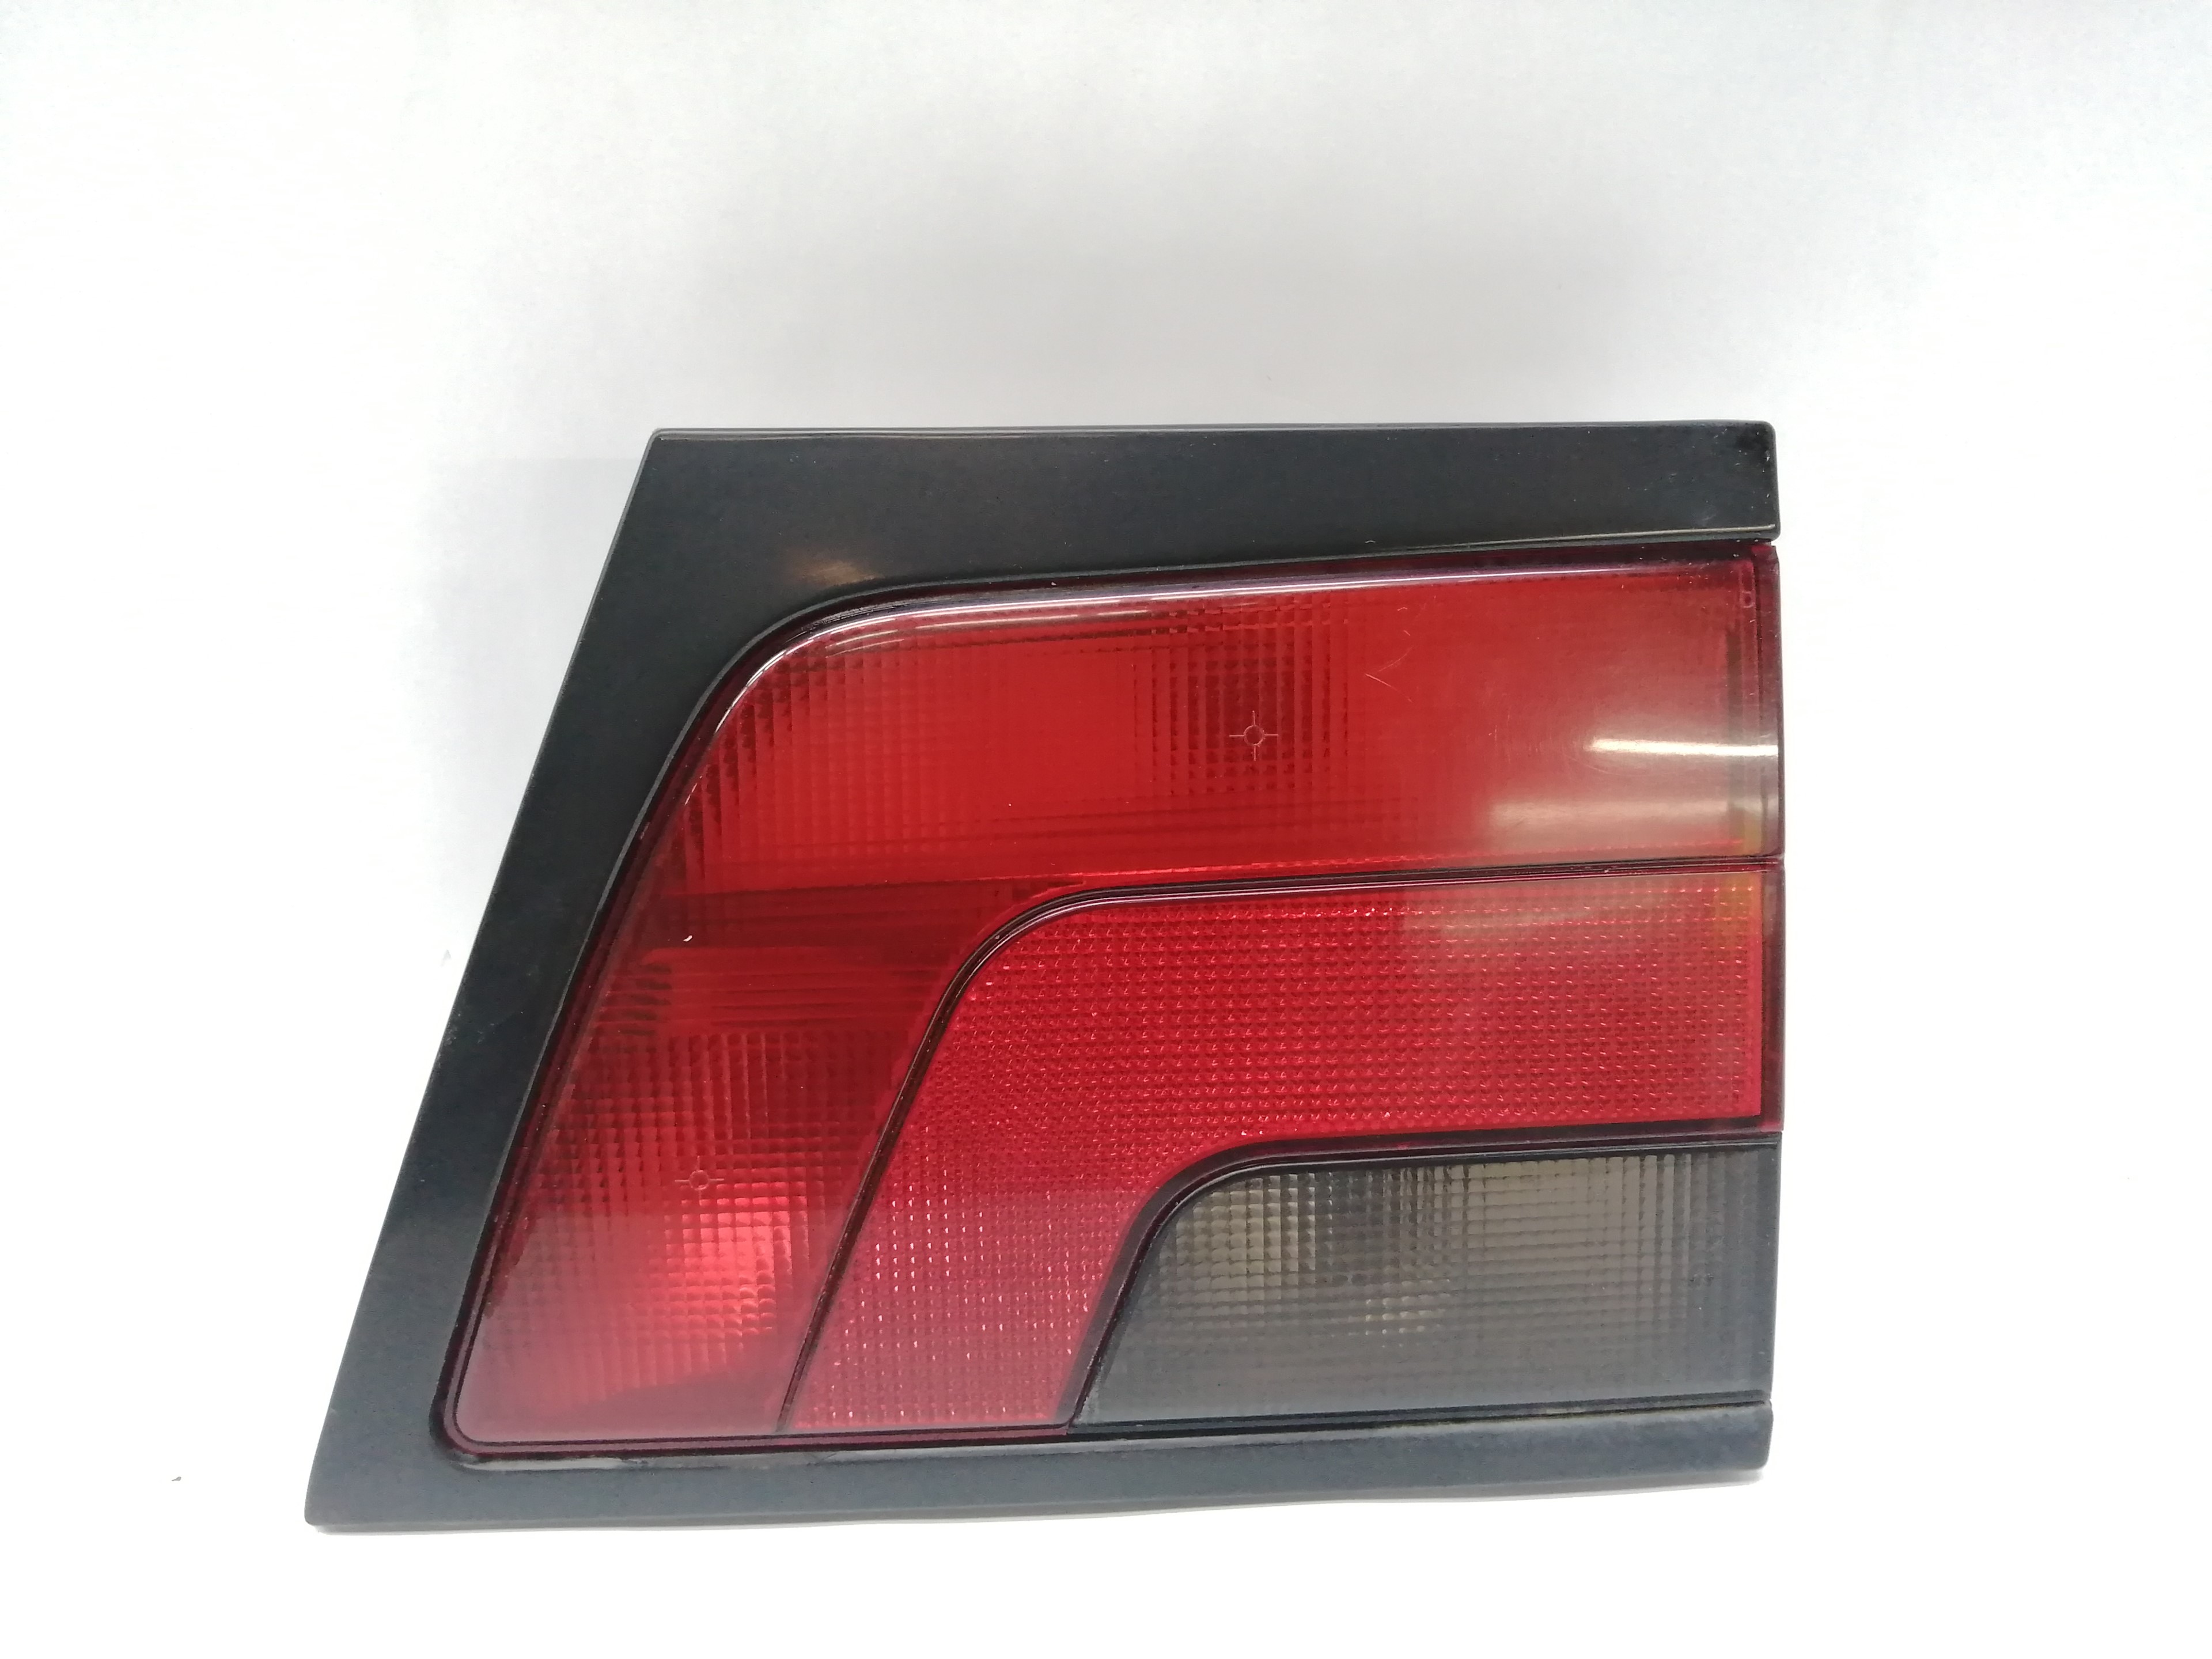 PEUGEOT 806 221 (1994-2002) Rear Right Taillight Lamp 6351A6 25177651